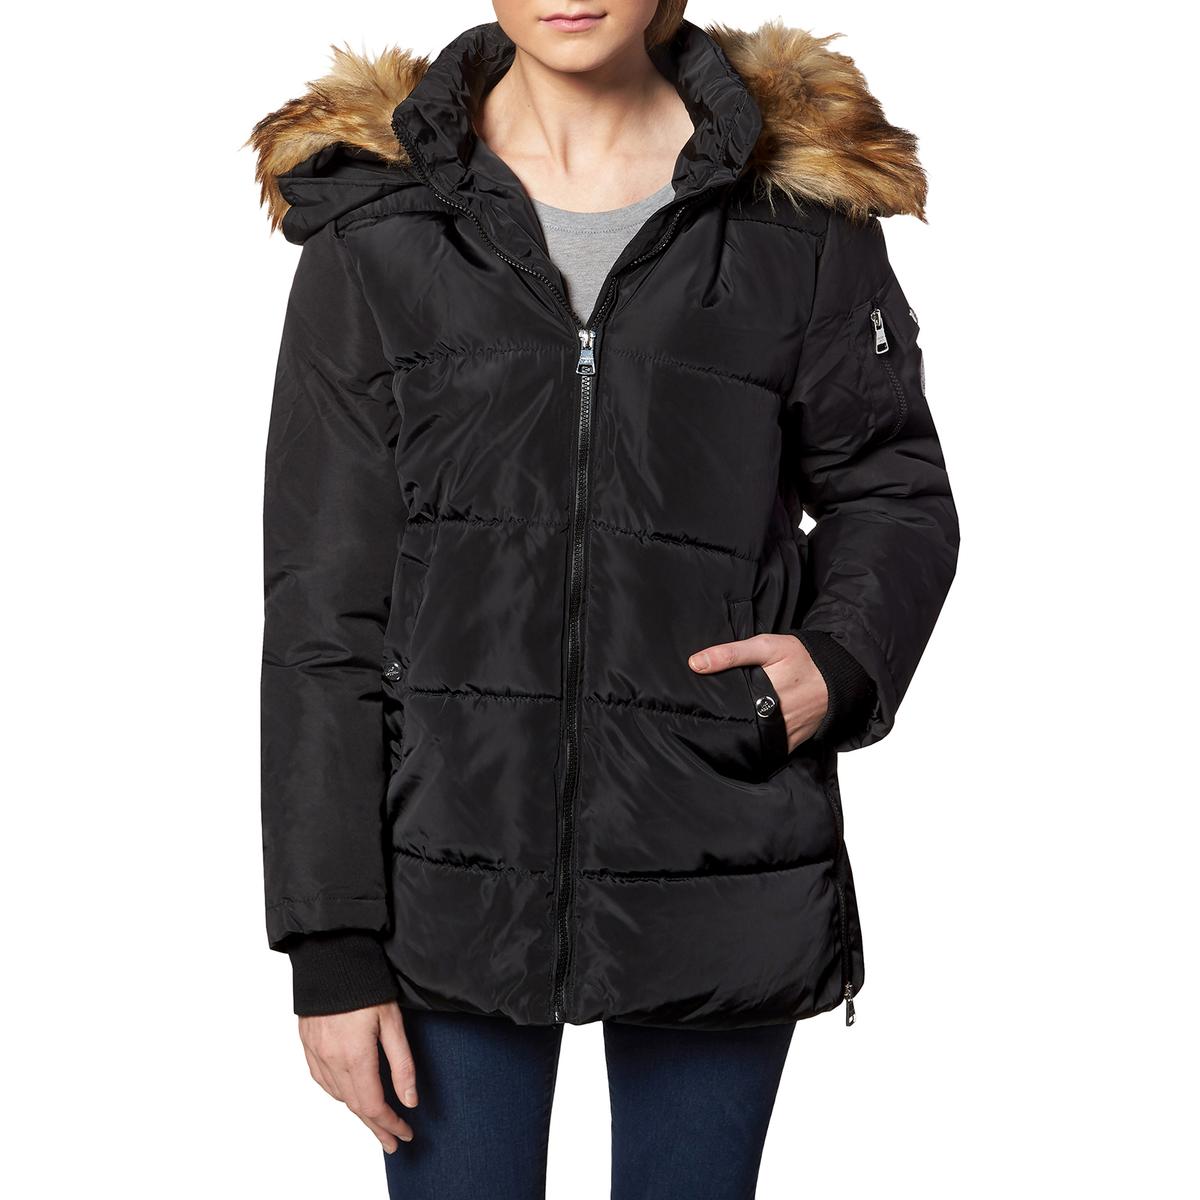 Madden Girl Womens Black Faux Fur Quilted Puffer Coat Outerwear XL BHFO ...